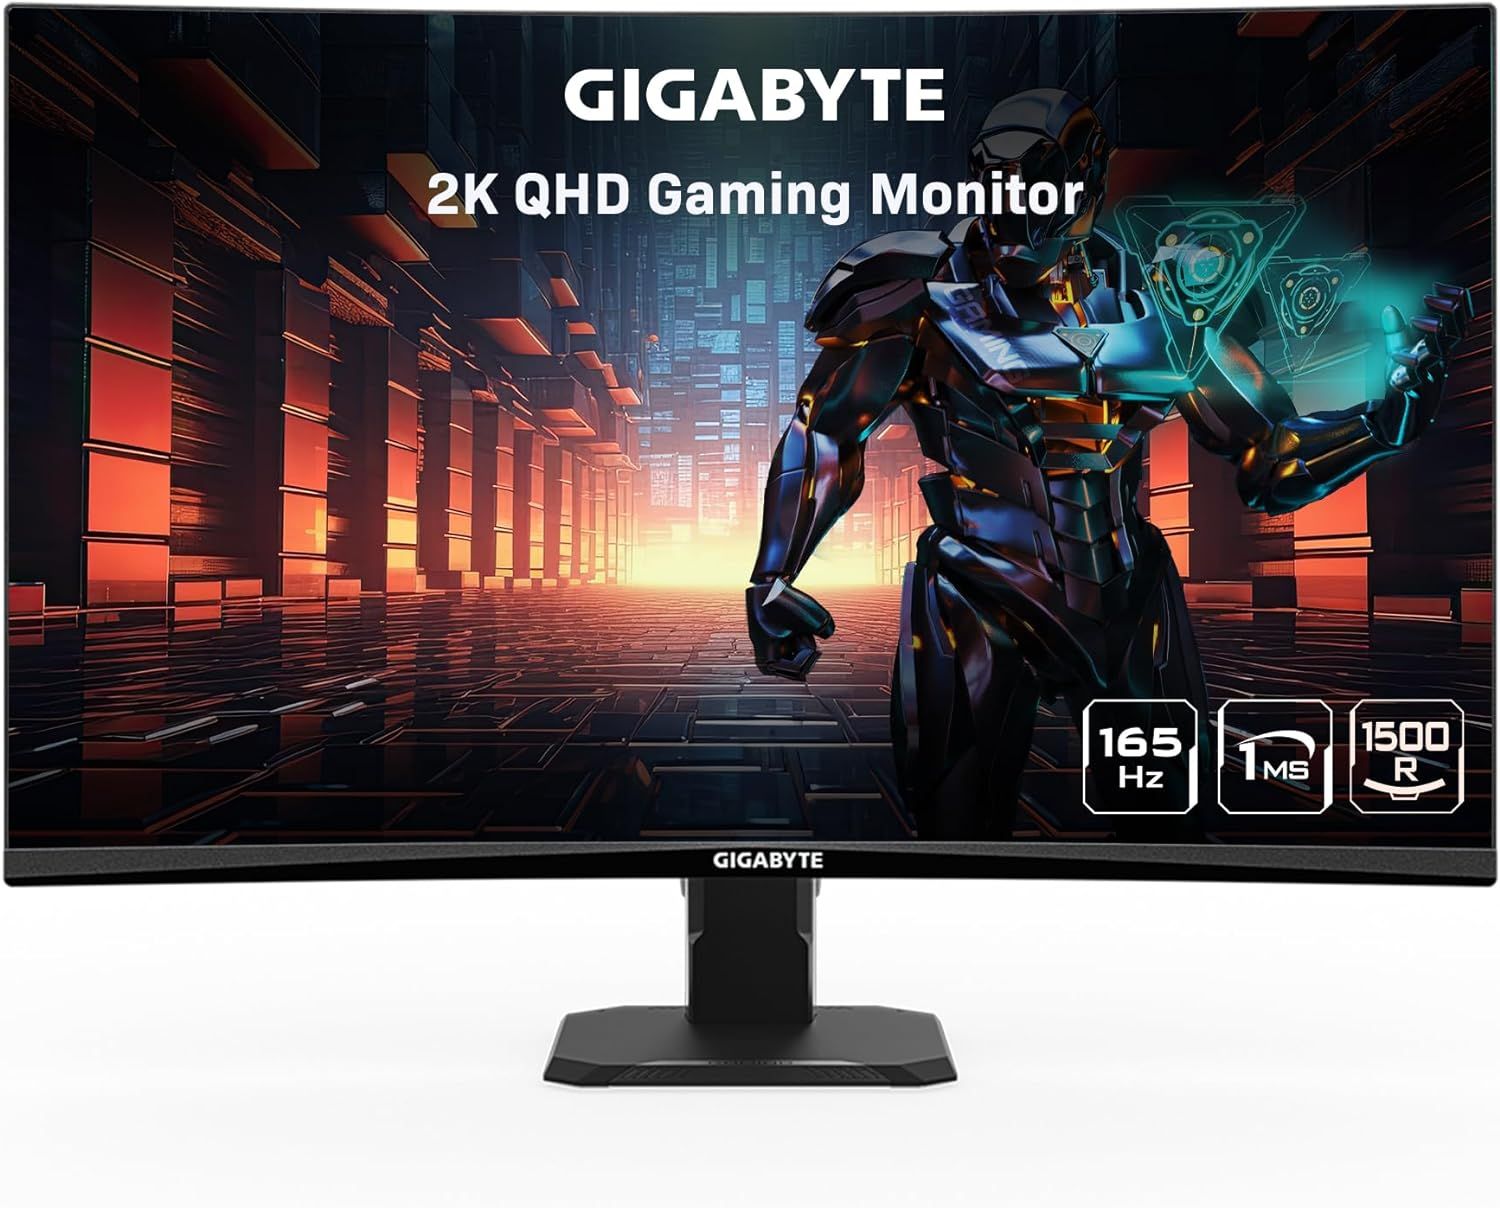 Save $200 on LG's Fantastic 34-inch Curved 1ms Ultrawide Gaming Monitor -  IGN